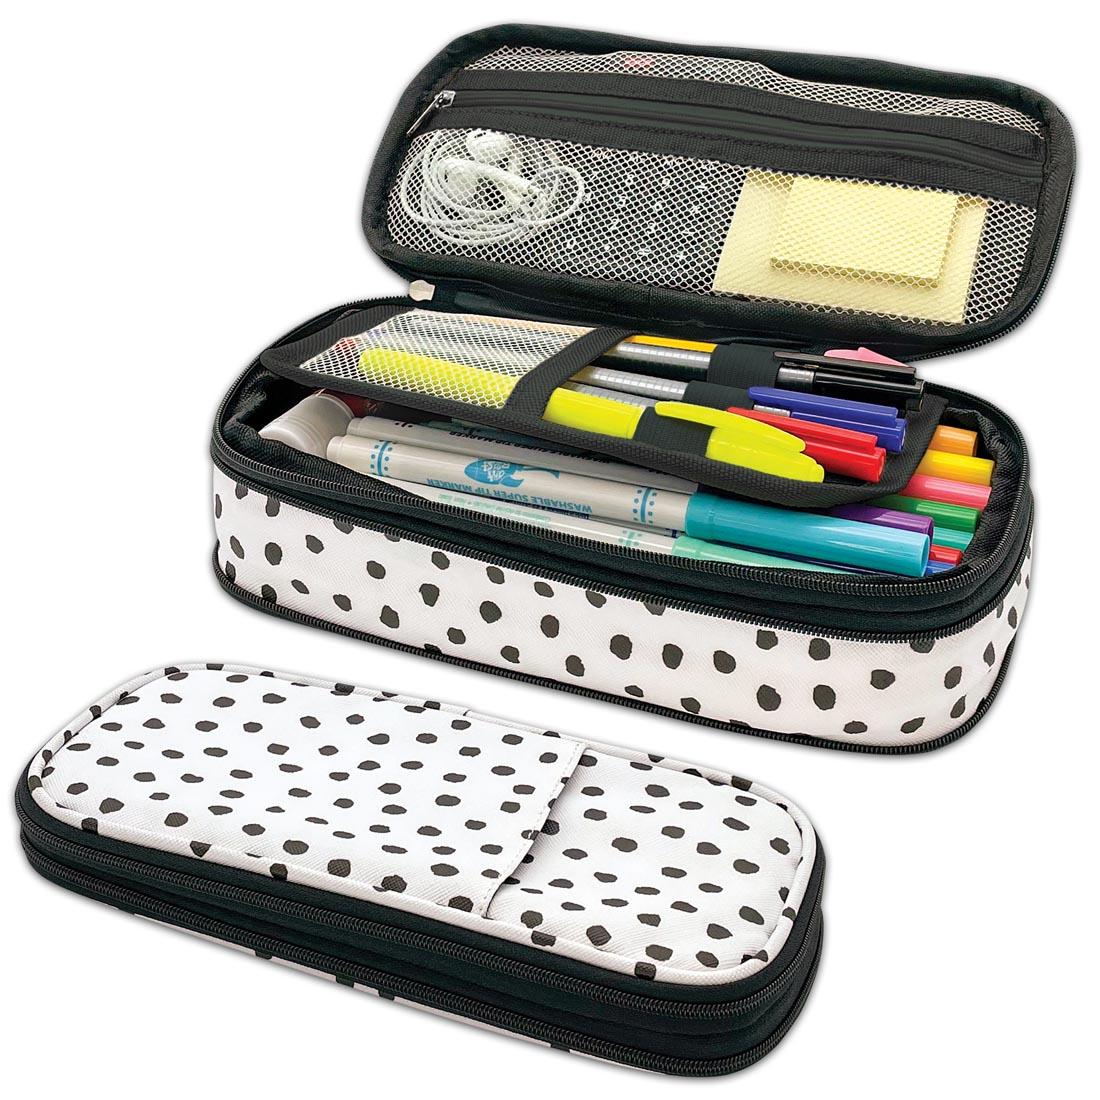 Black Painted Dots On White Pencil Case shown both closed and open with suggested contents inside